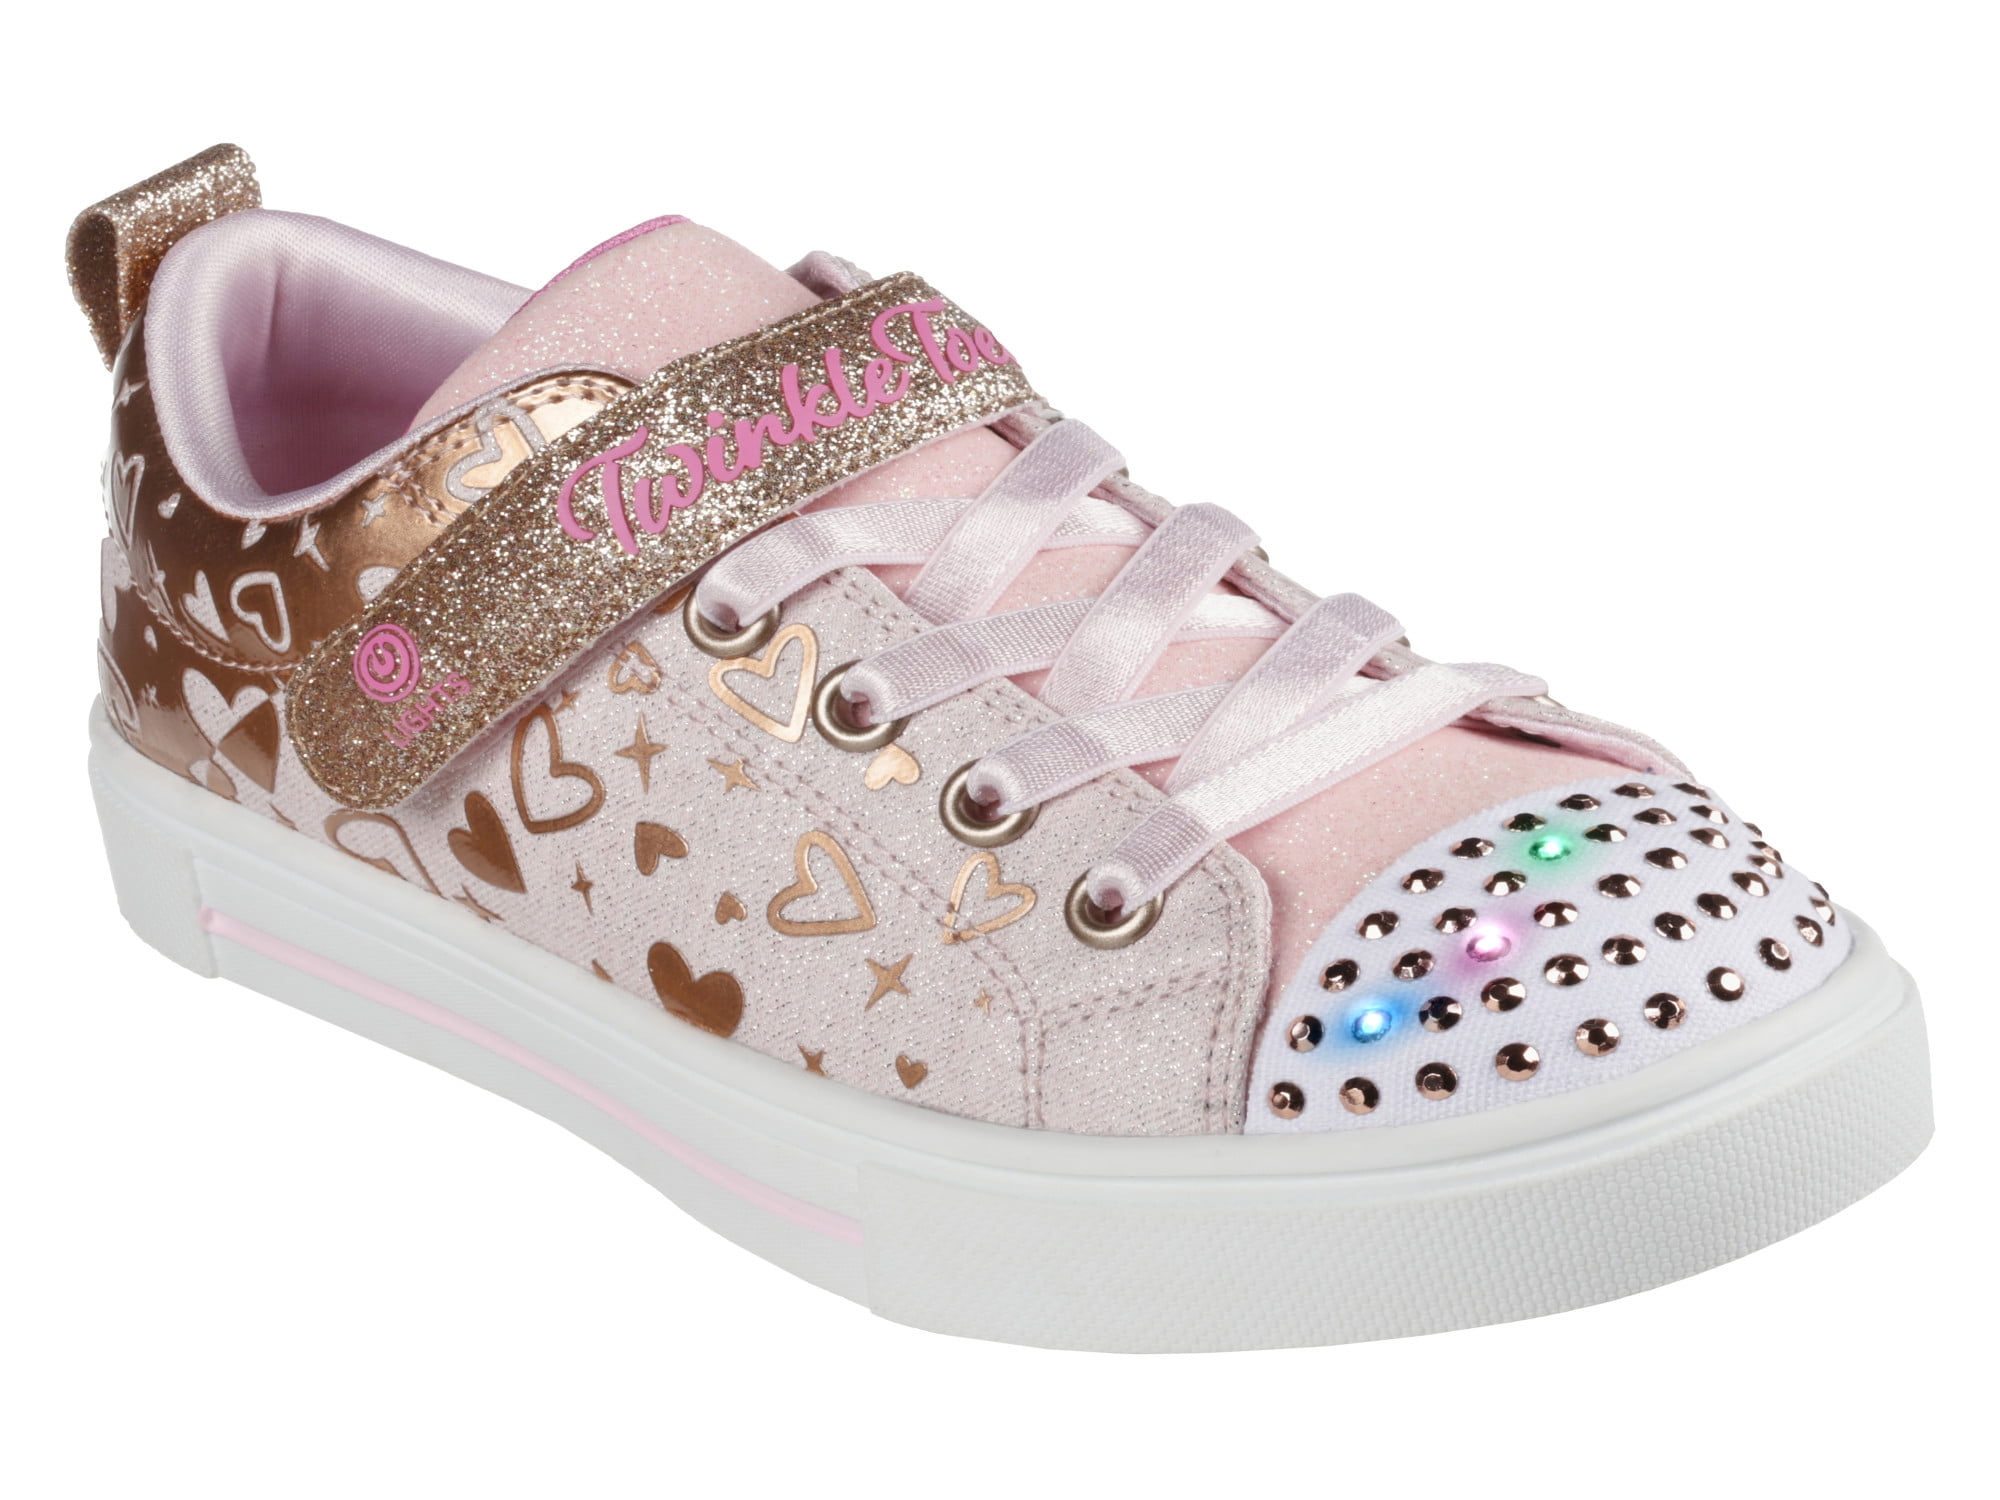 Skechers Girls Youth Twinkle Toes Up Sneakers Heather Sizes 10.5-3 - Walmart.com